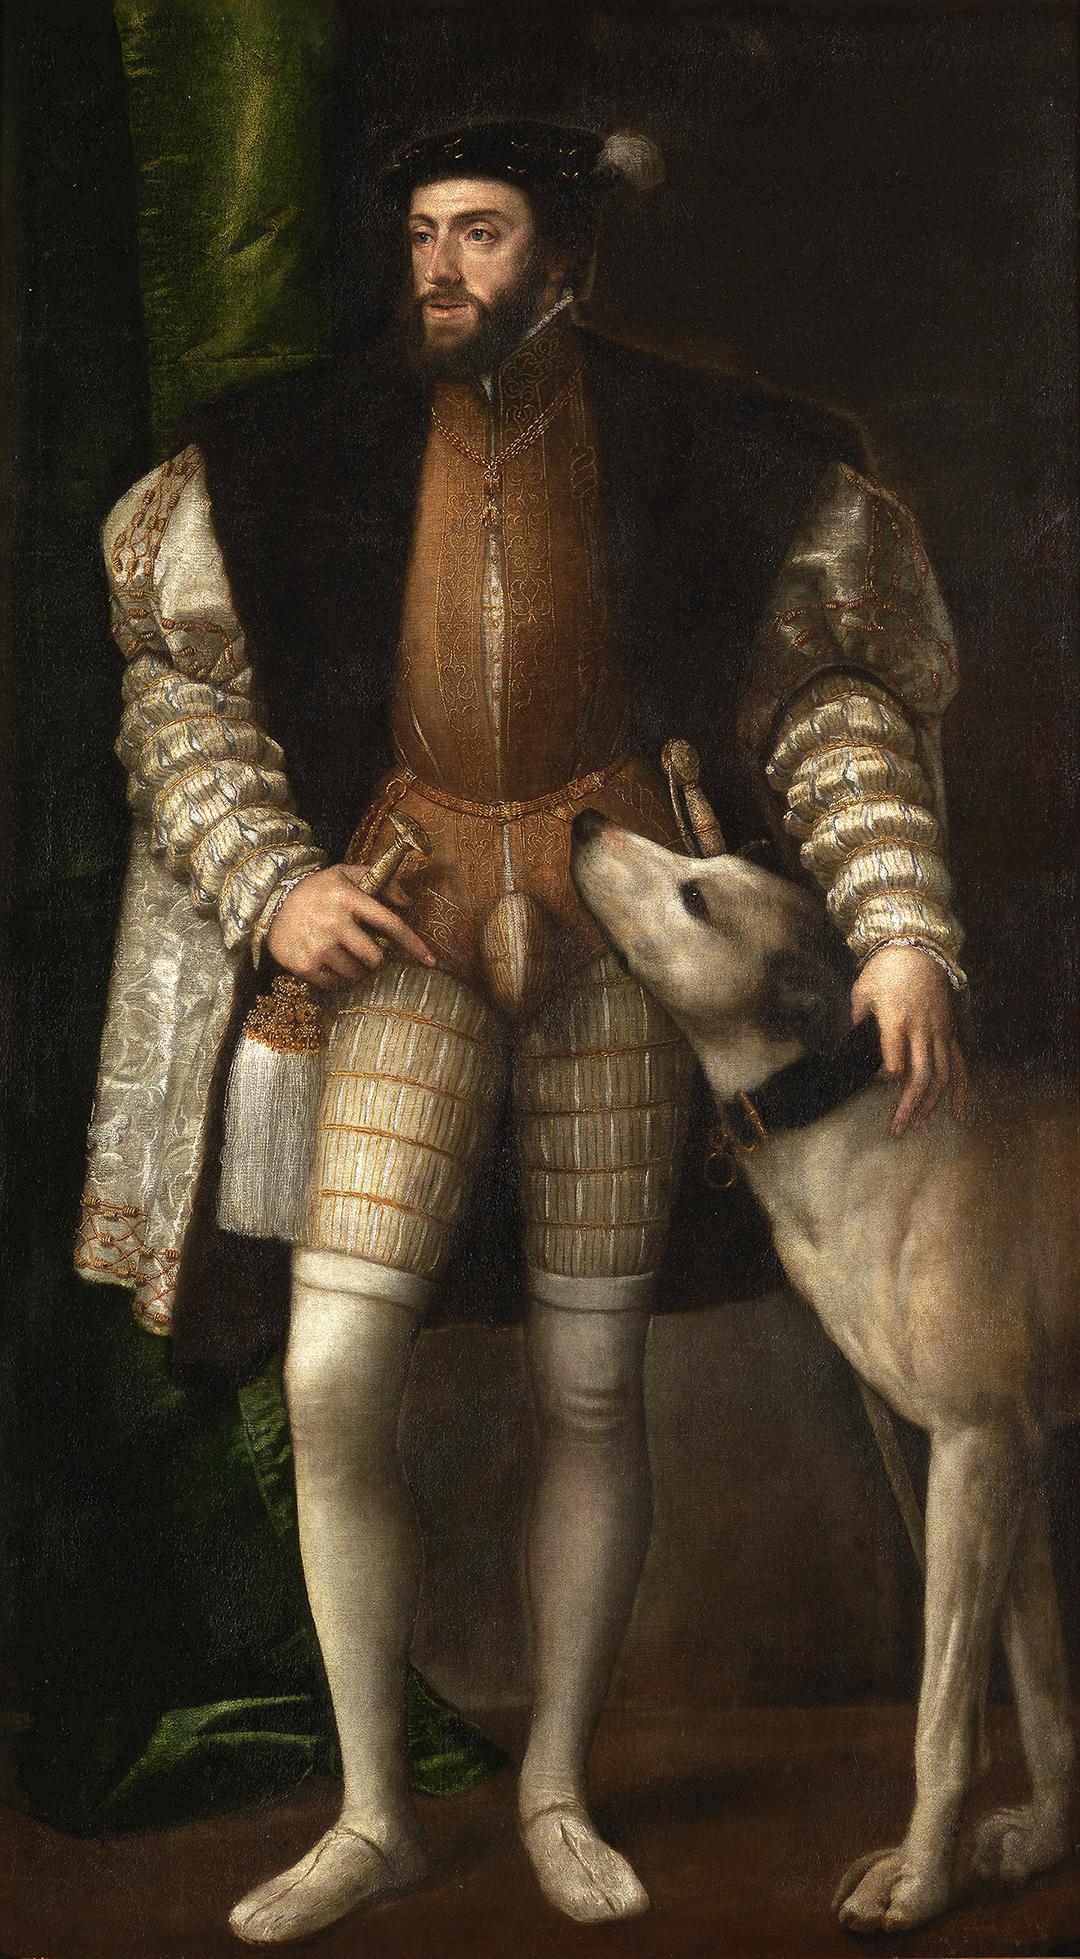 "Portrait of Charles V With a Dog," 1533, by Titian. Oil on canvas. The Prado Museum, Madrid. (Public Domain)